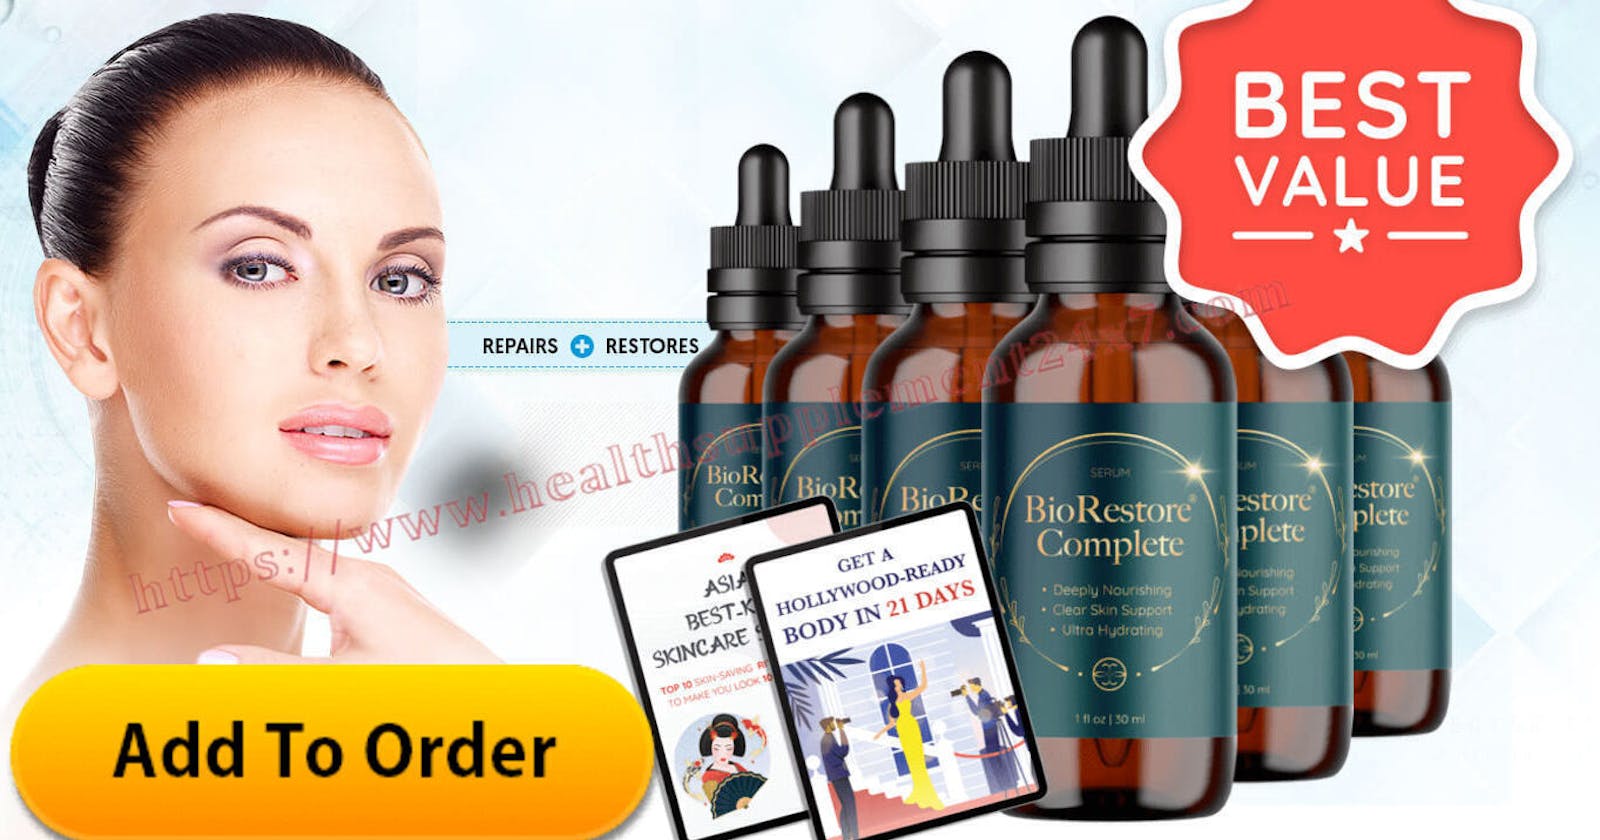 BioRestore Complete Formula Will Remove All Dark Spots And Wrinkles, Transformed Your Skin Naturally(Spam Or Legit)